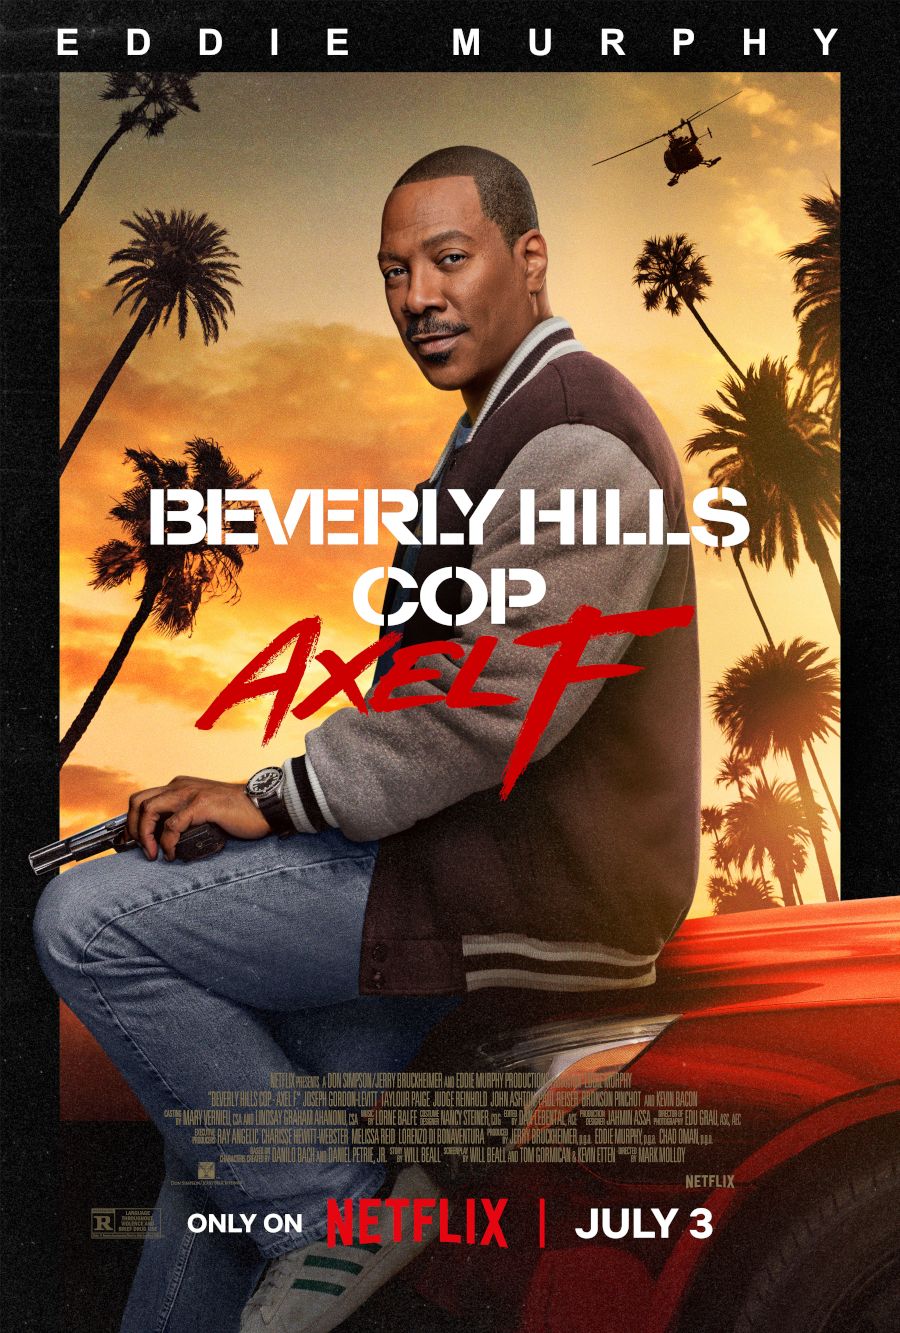 Beverly Hills Cop Axel F Film Poster